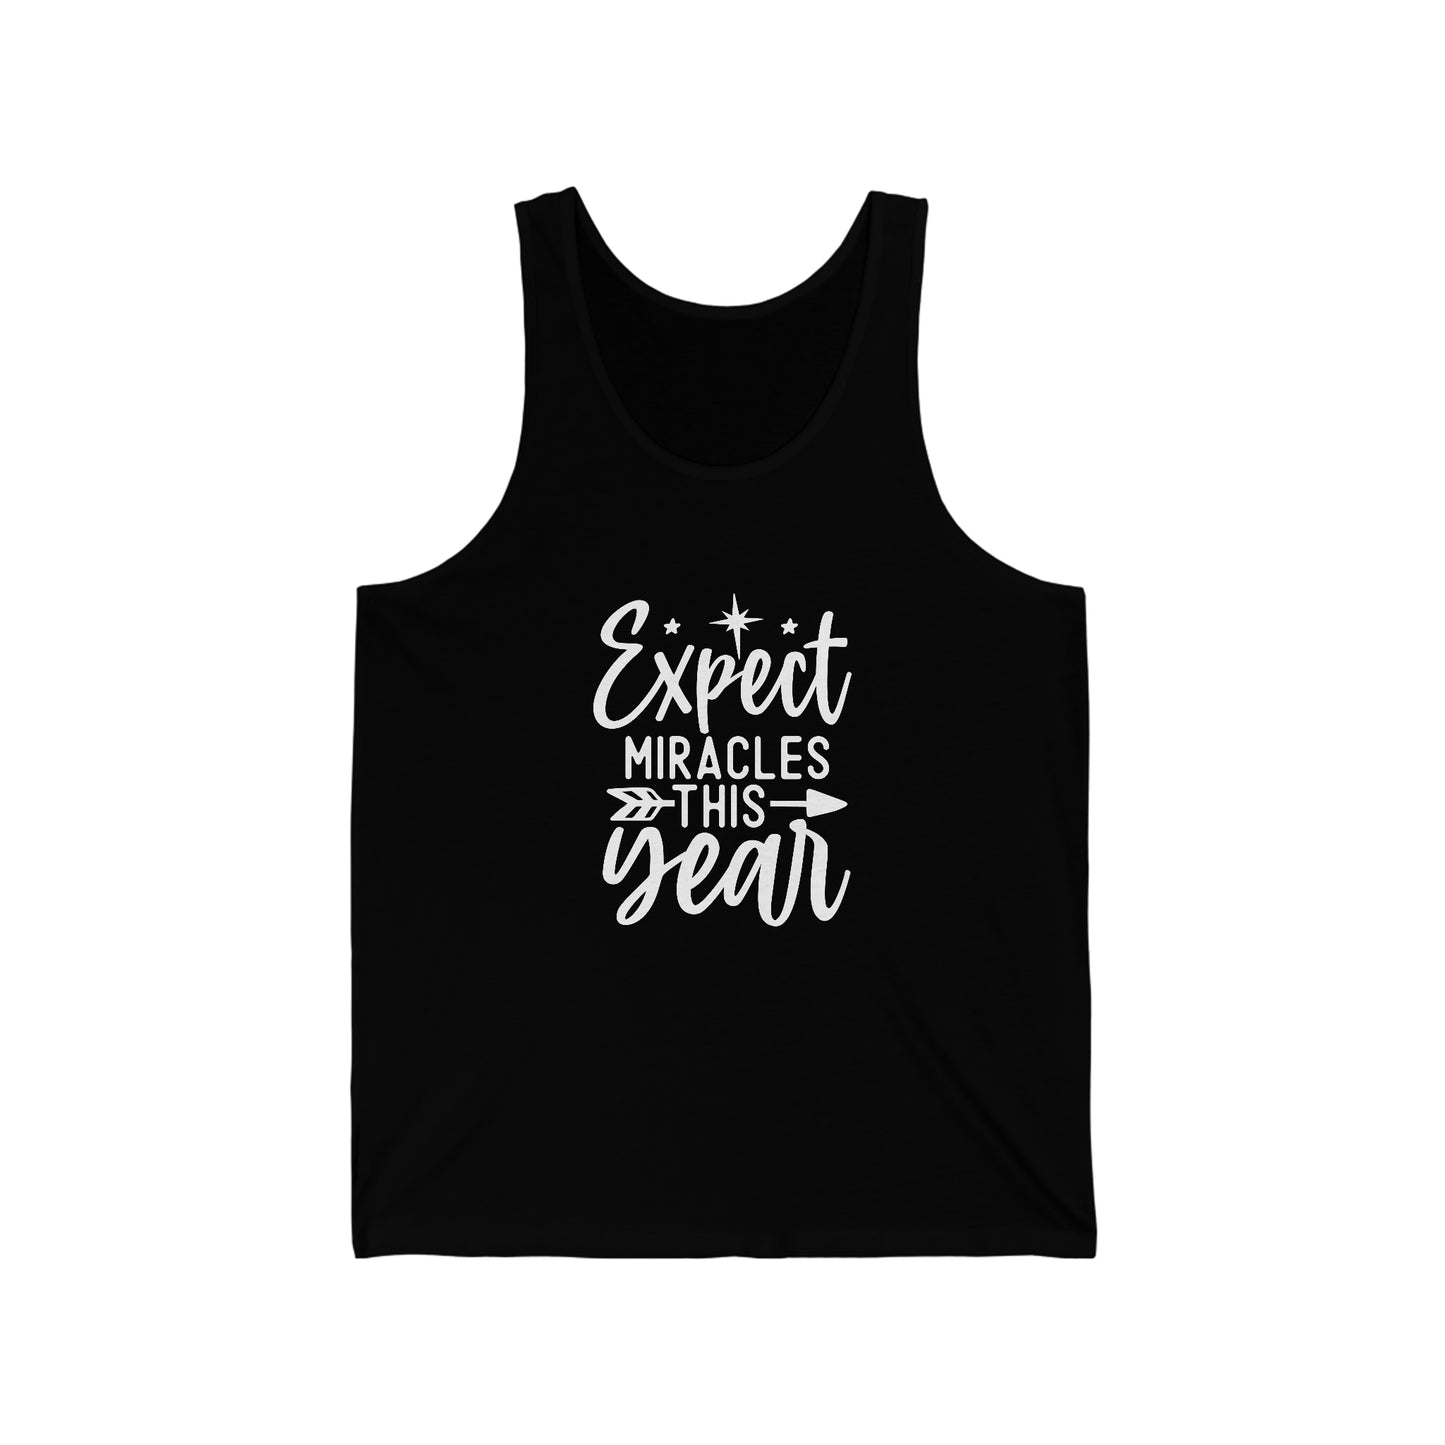 Expect Miracles Unisex Jersey Tank